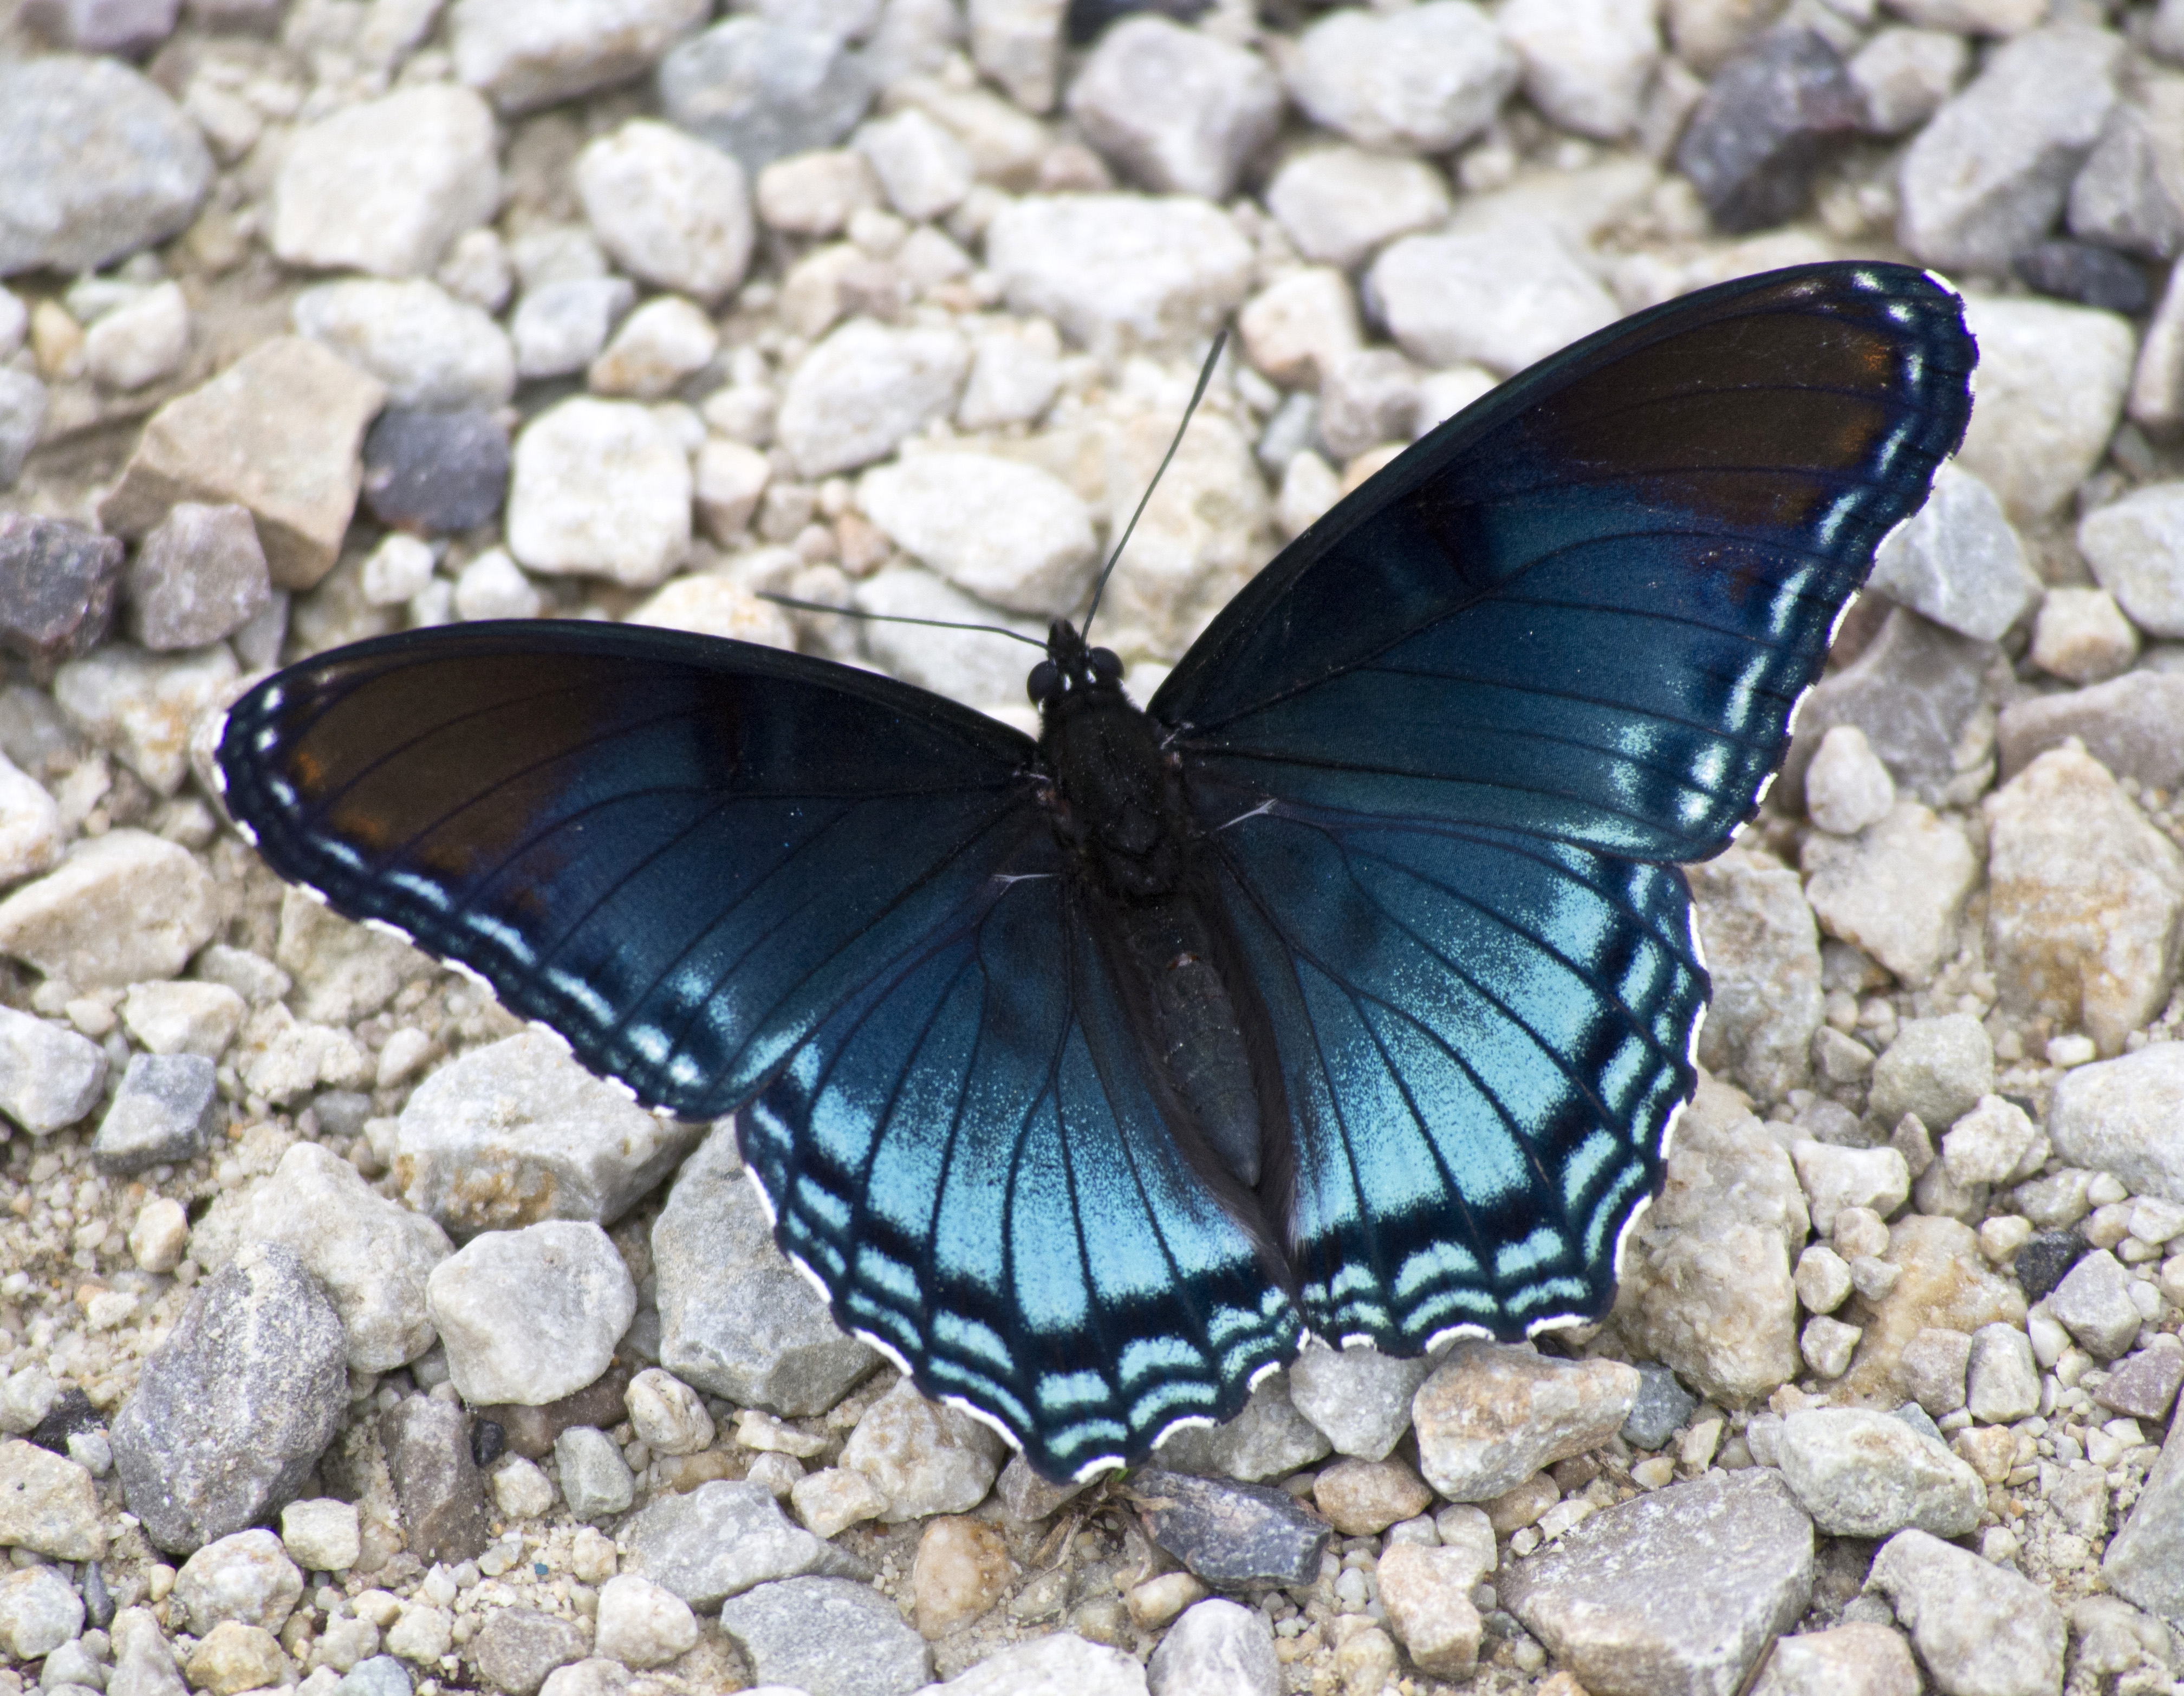 Blue Butterfly on the ground image - Free stock photo - Public ...